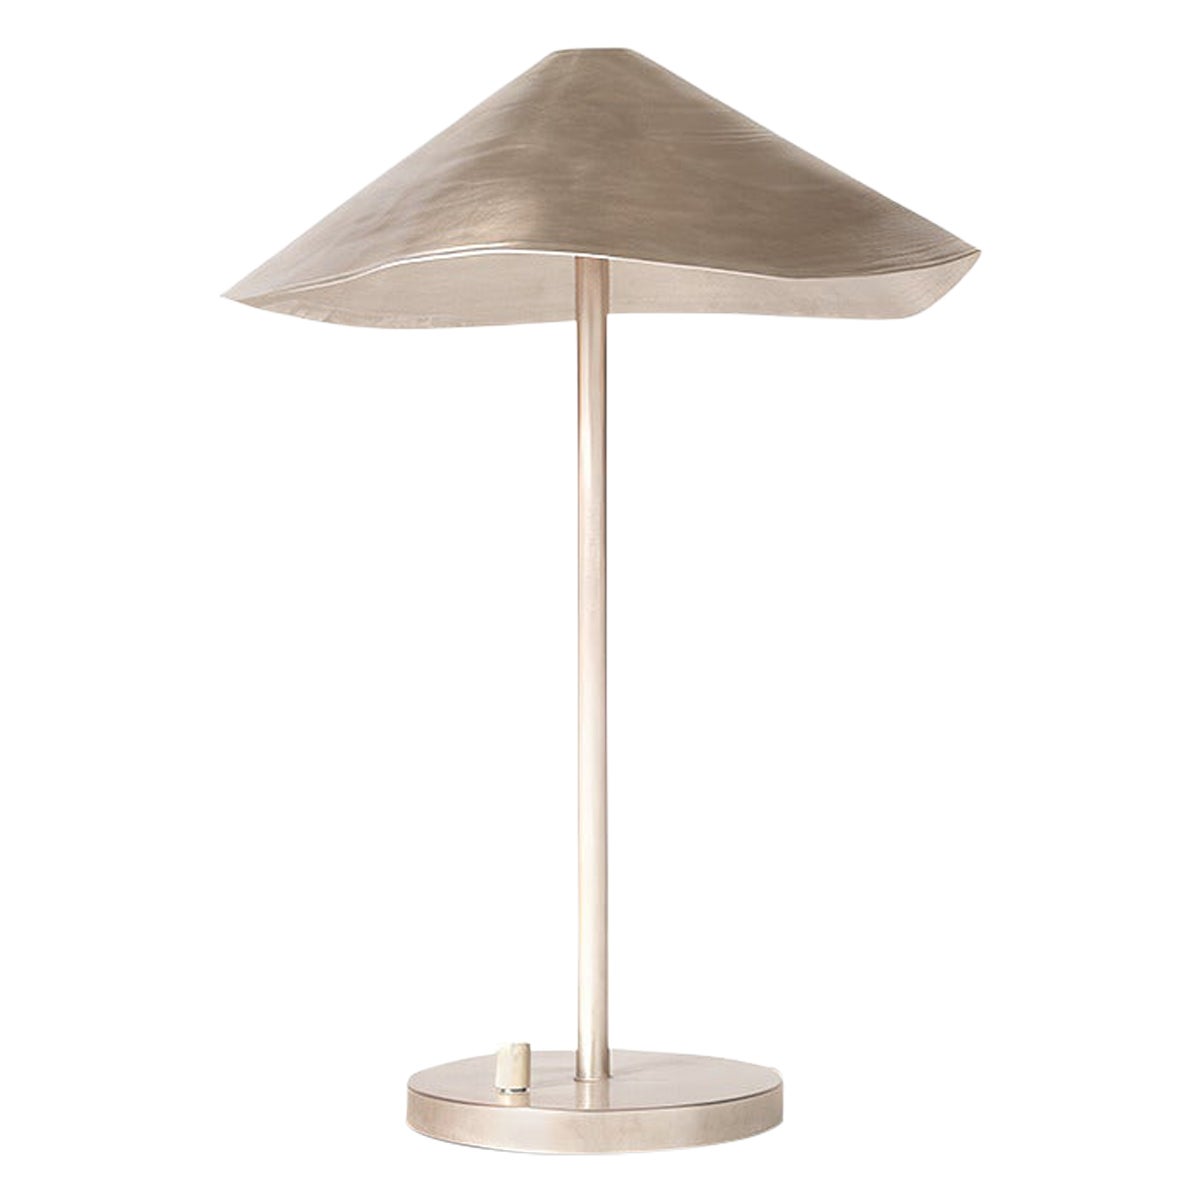 Silver Finish Copper Petal-Shaped Antica VII Table Lamp by Ohla Studio